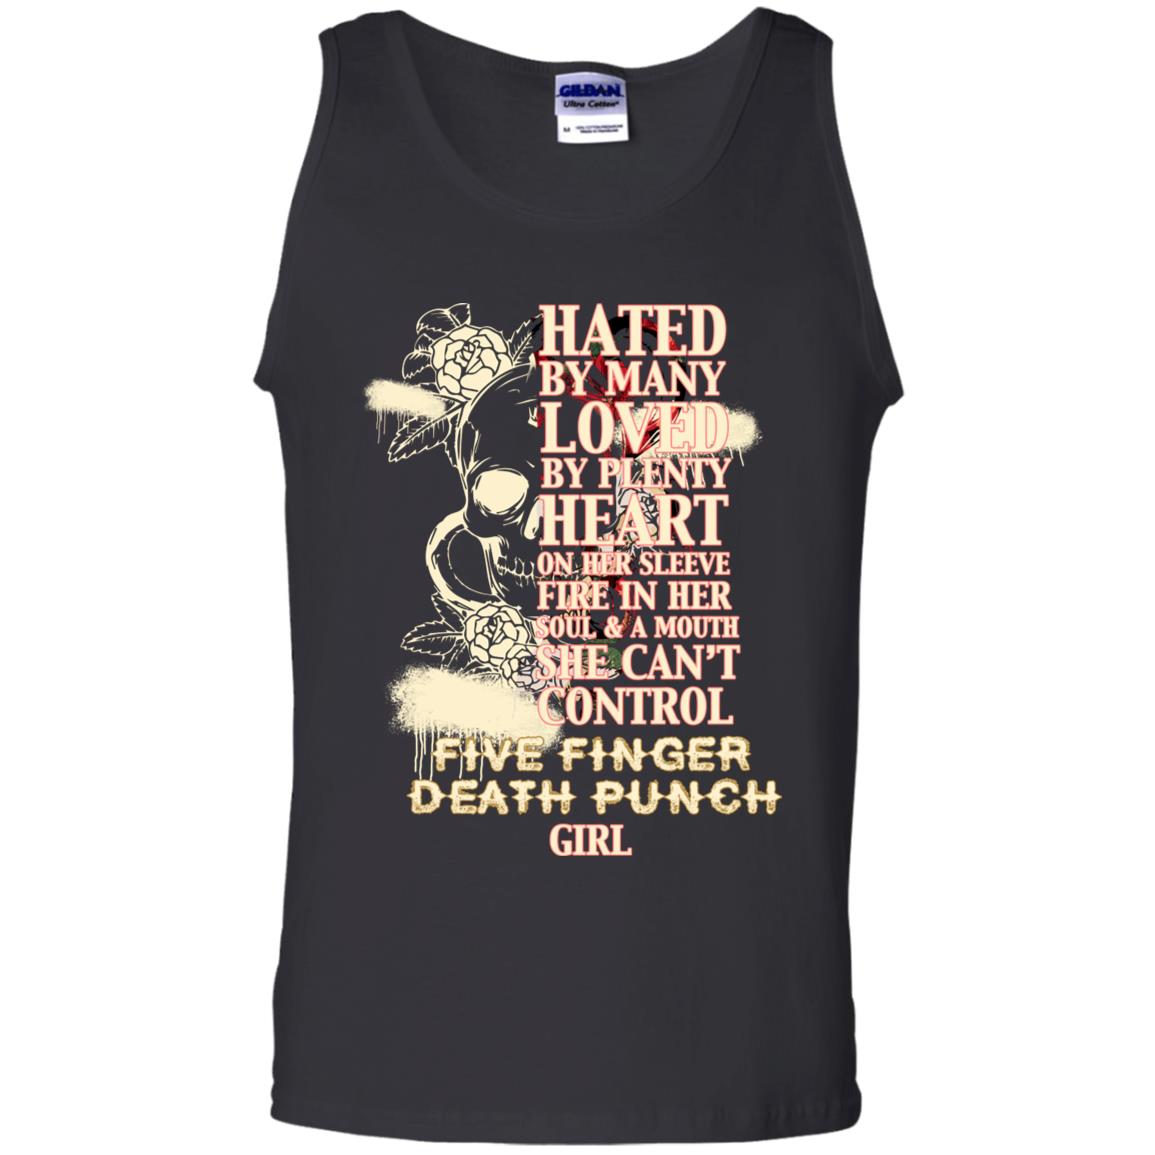 Hated By Many Loved By Plenty Heart On Her Sleeve Fire In Her Soul And Mouth She Can't Control Five Finger Death Punch GirlG220 Gildan 100% Cotton Tank Top